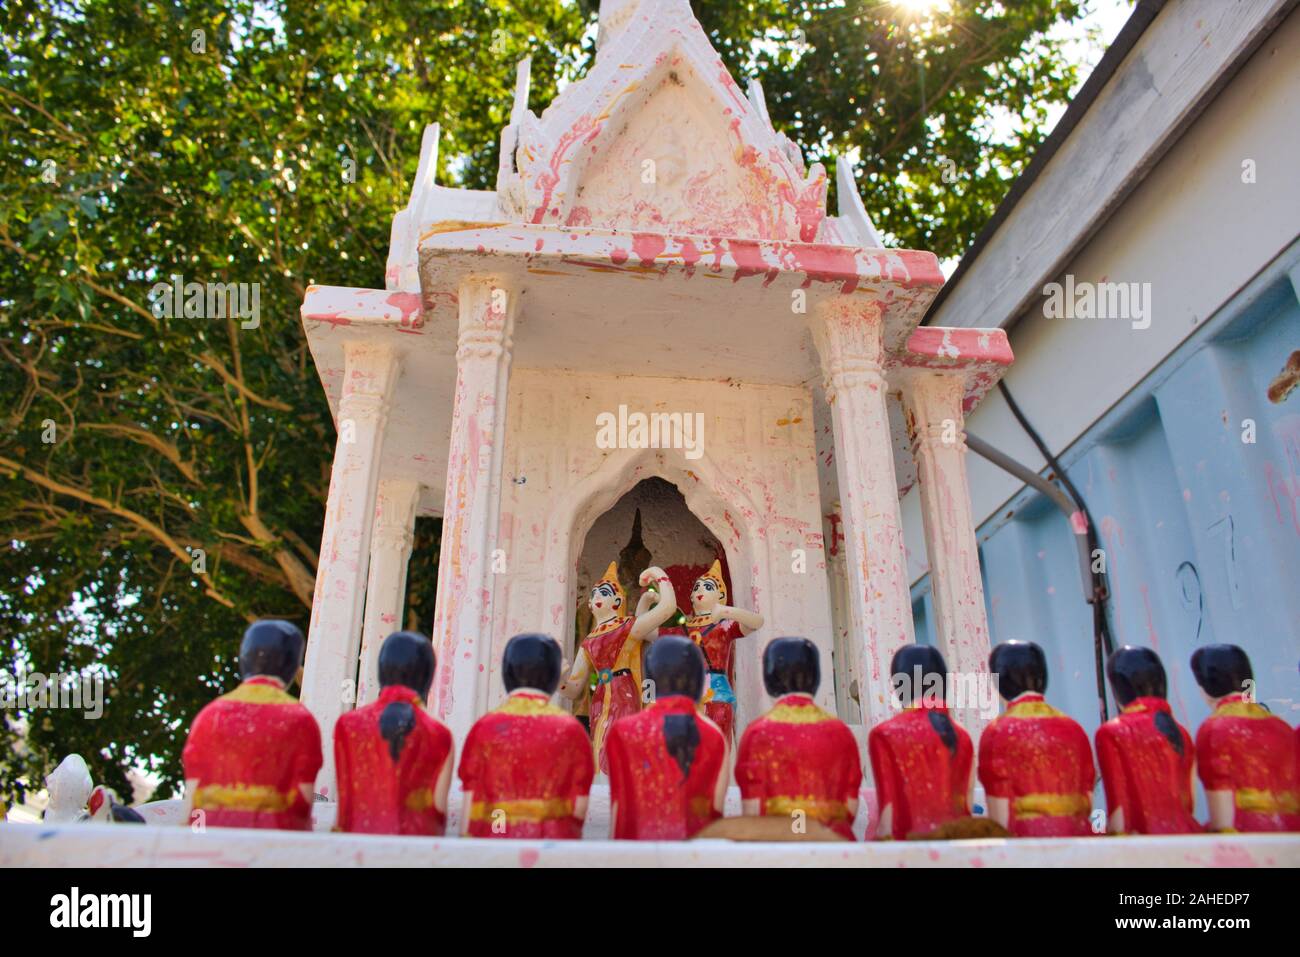 This photo shows a look into a small Buddhist temple in Thailand where beautiful ceramic figures are dancing Stock Photo